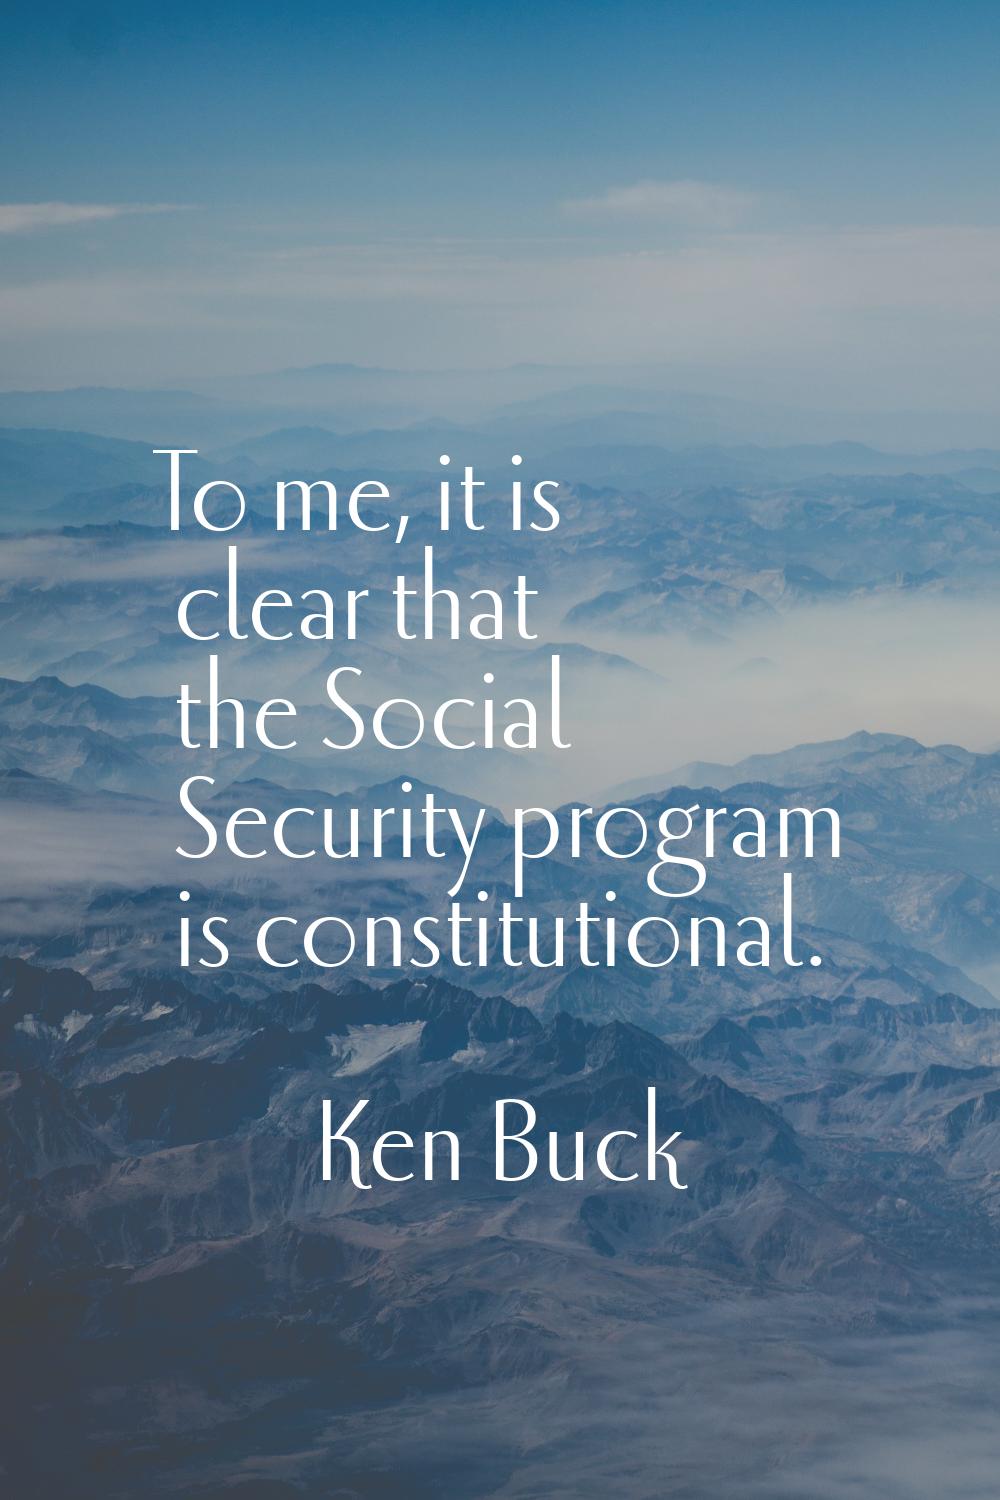 To me, it is clear that the Social Security program is constitutional.